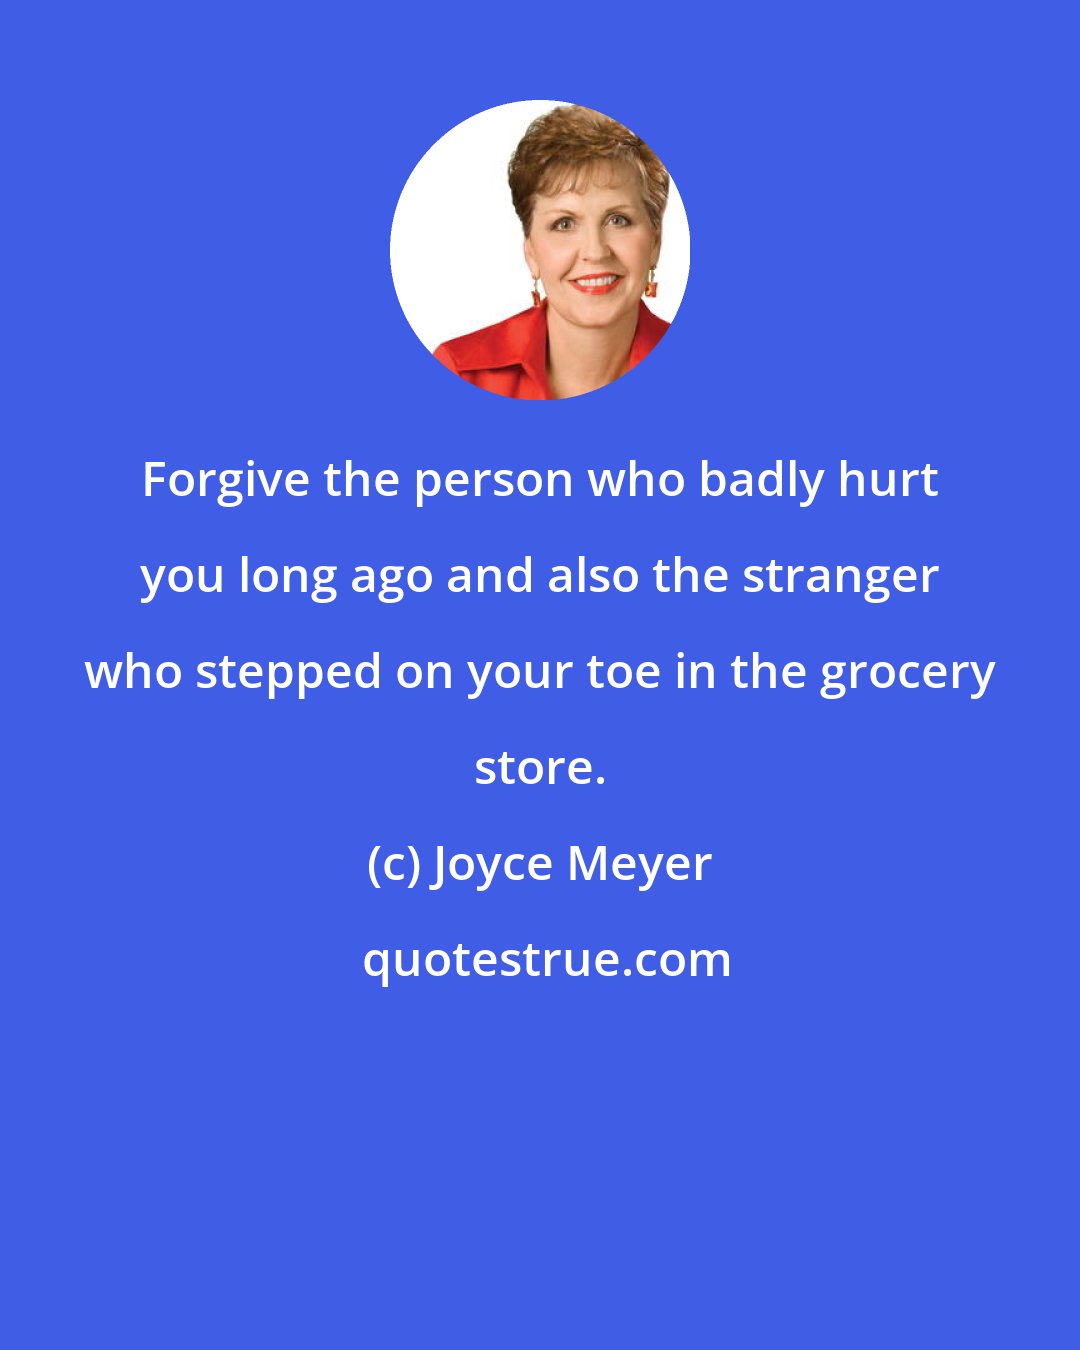 Joyce Meyer: Forgive the person who badly hurt you long ago and also the stranger who stepped on your toe in the grocery store.